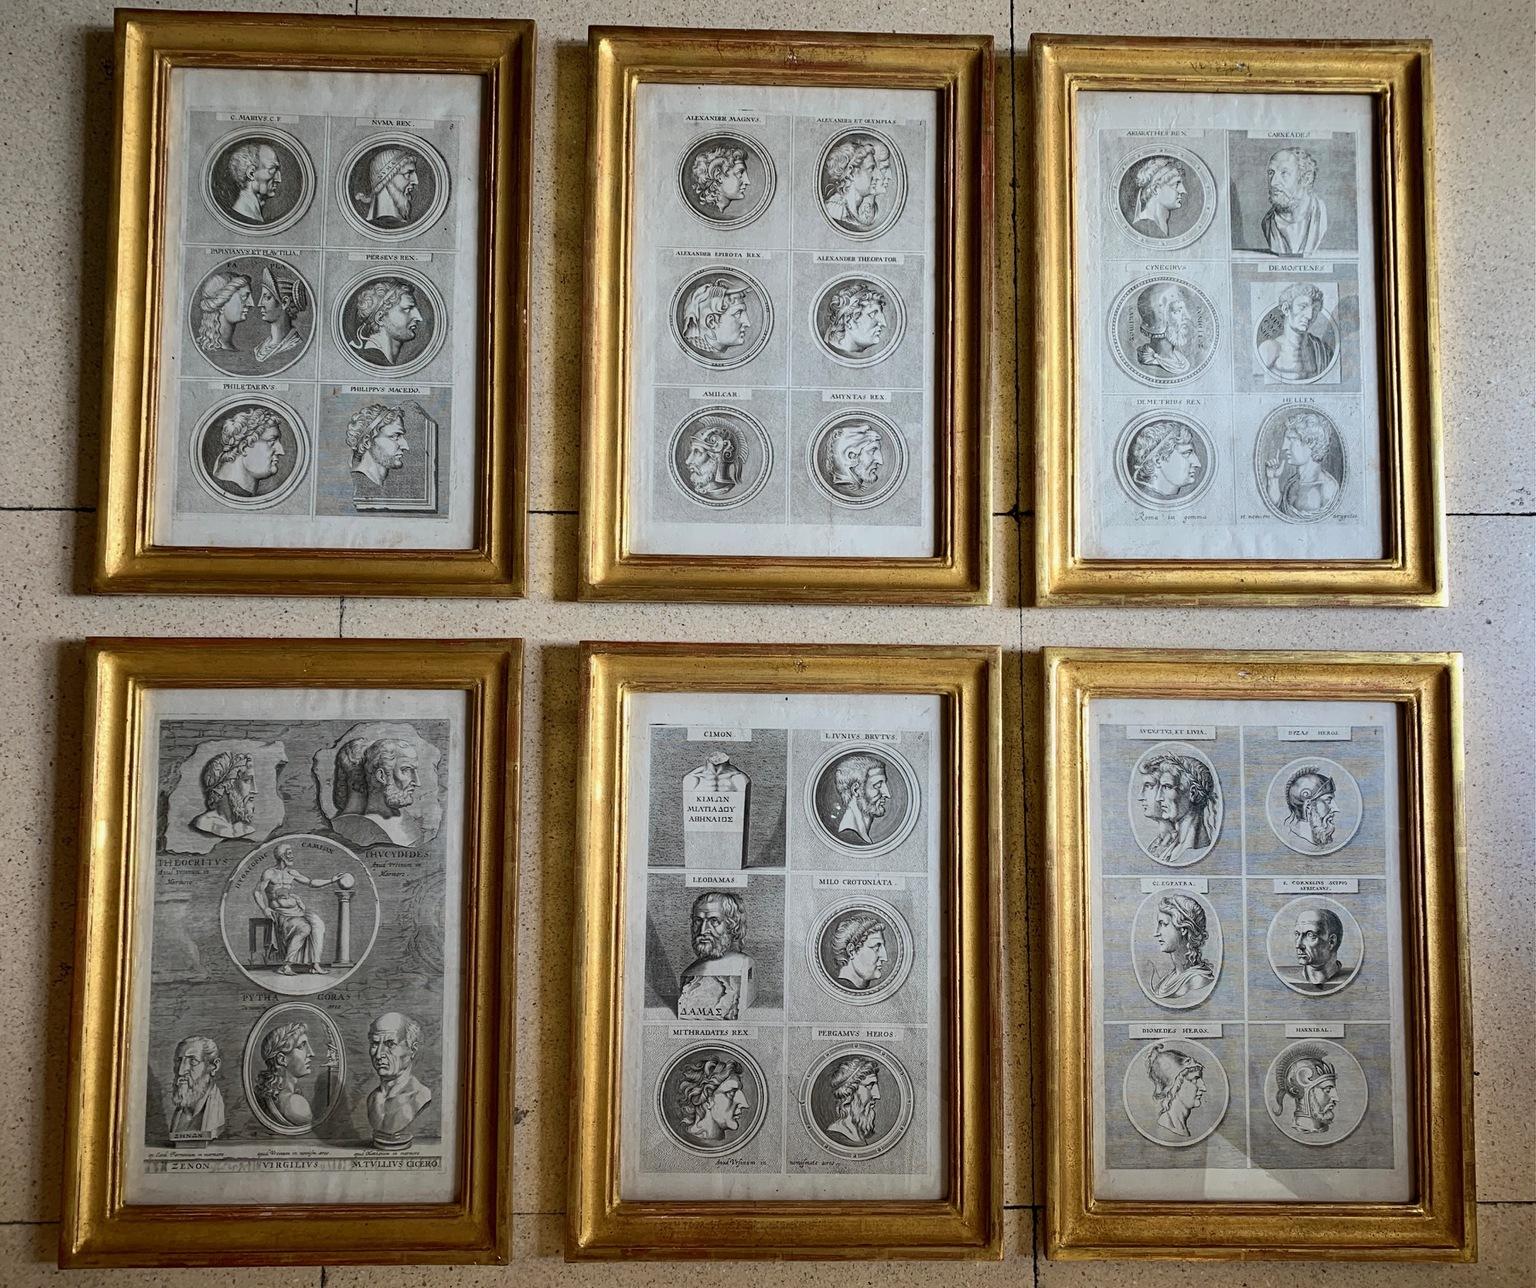 Set of six neoclassical engravings from the 18th century, representing effigies of Greek and Roman characters, philosophers, entrepreneurs and characters from Greek and Roman life, framed in gilt wood.